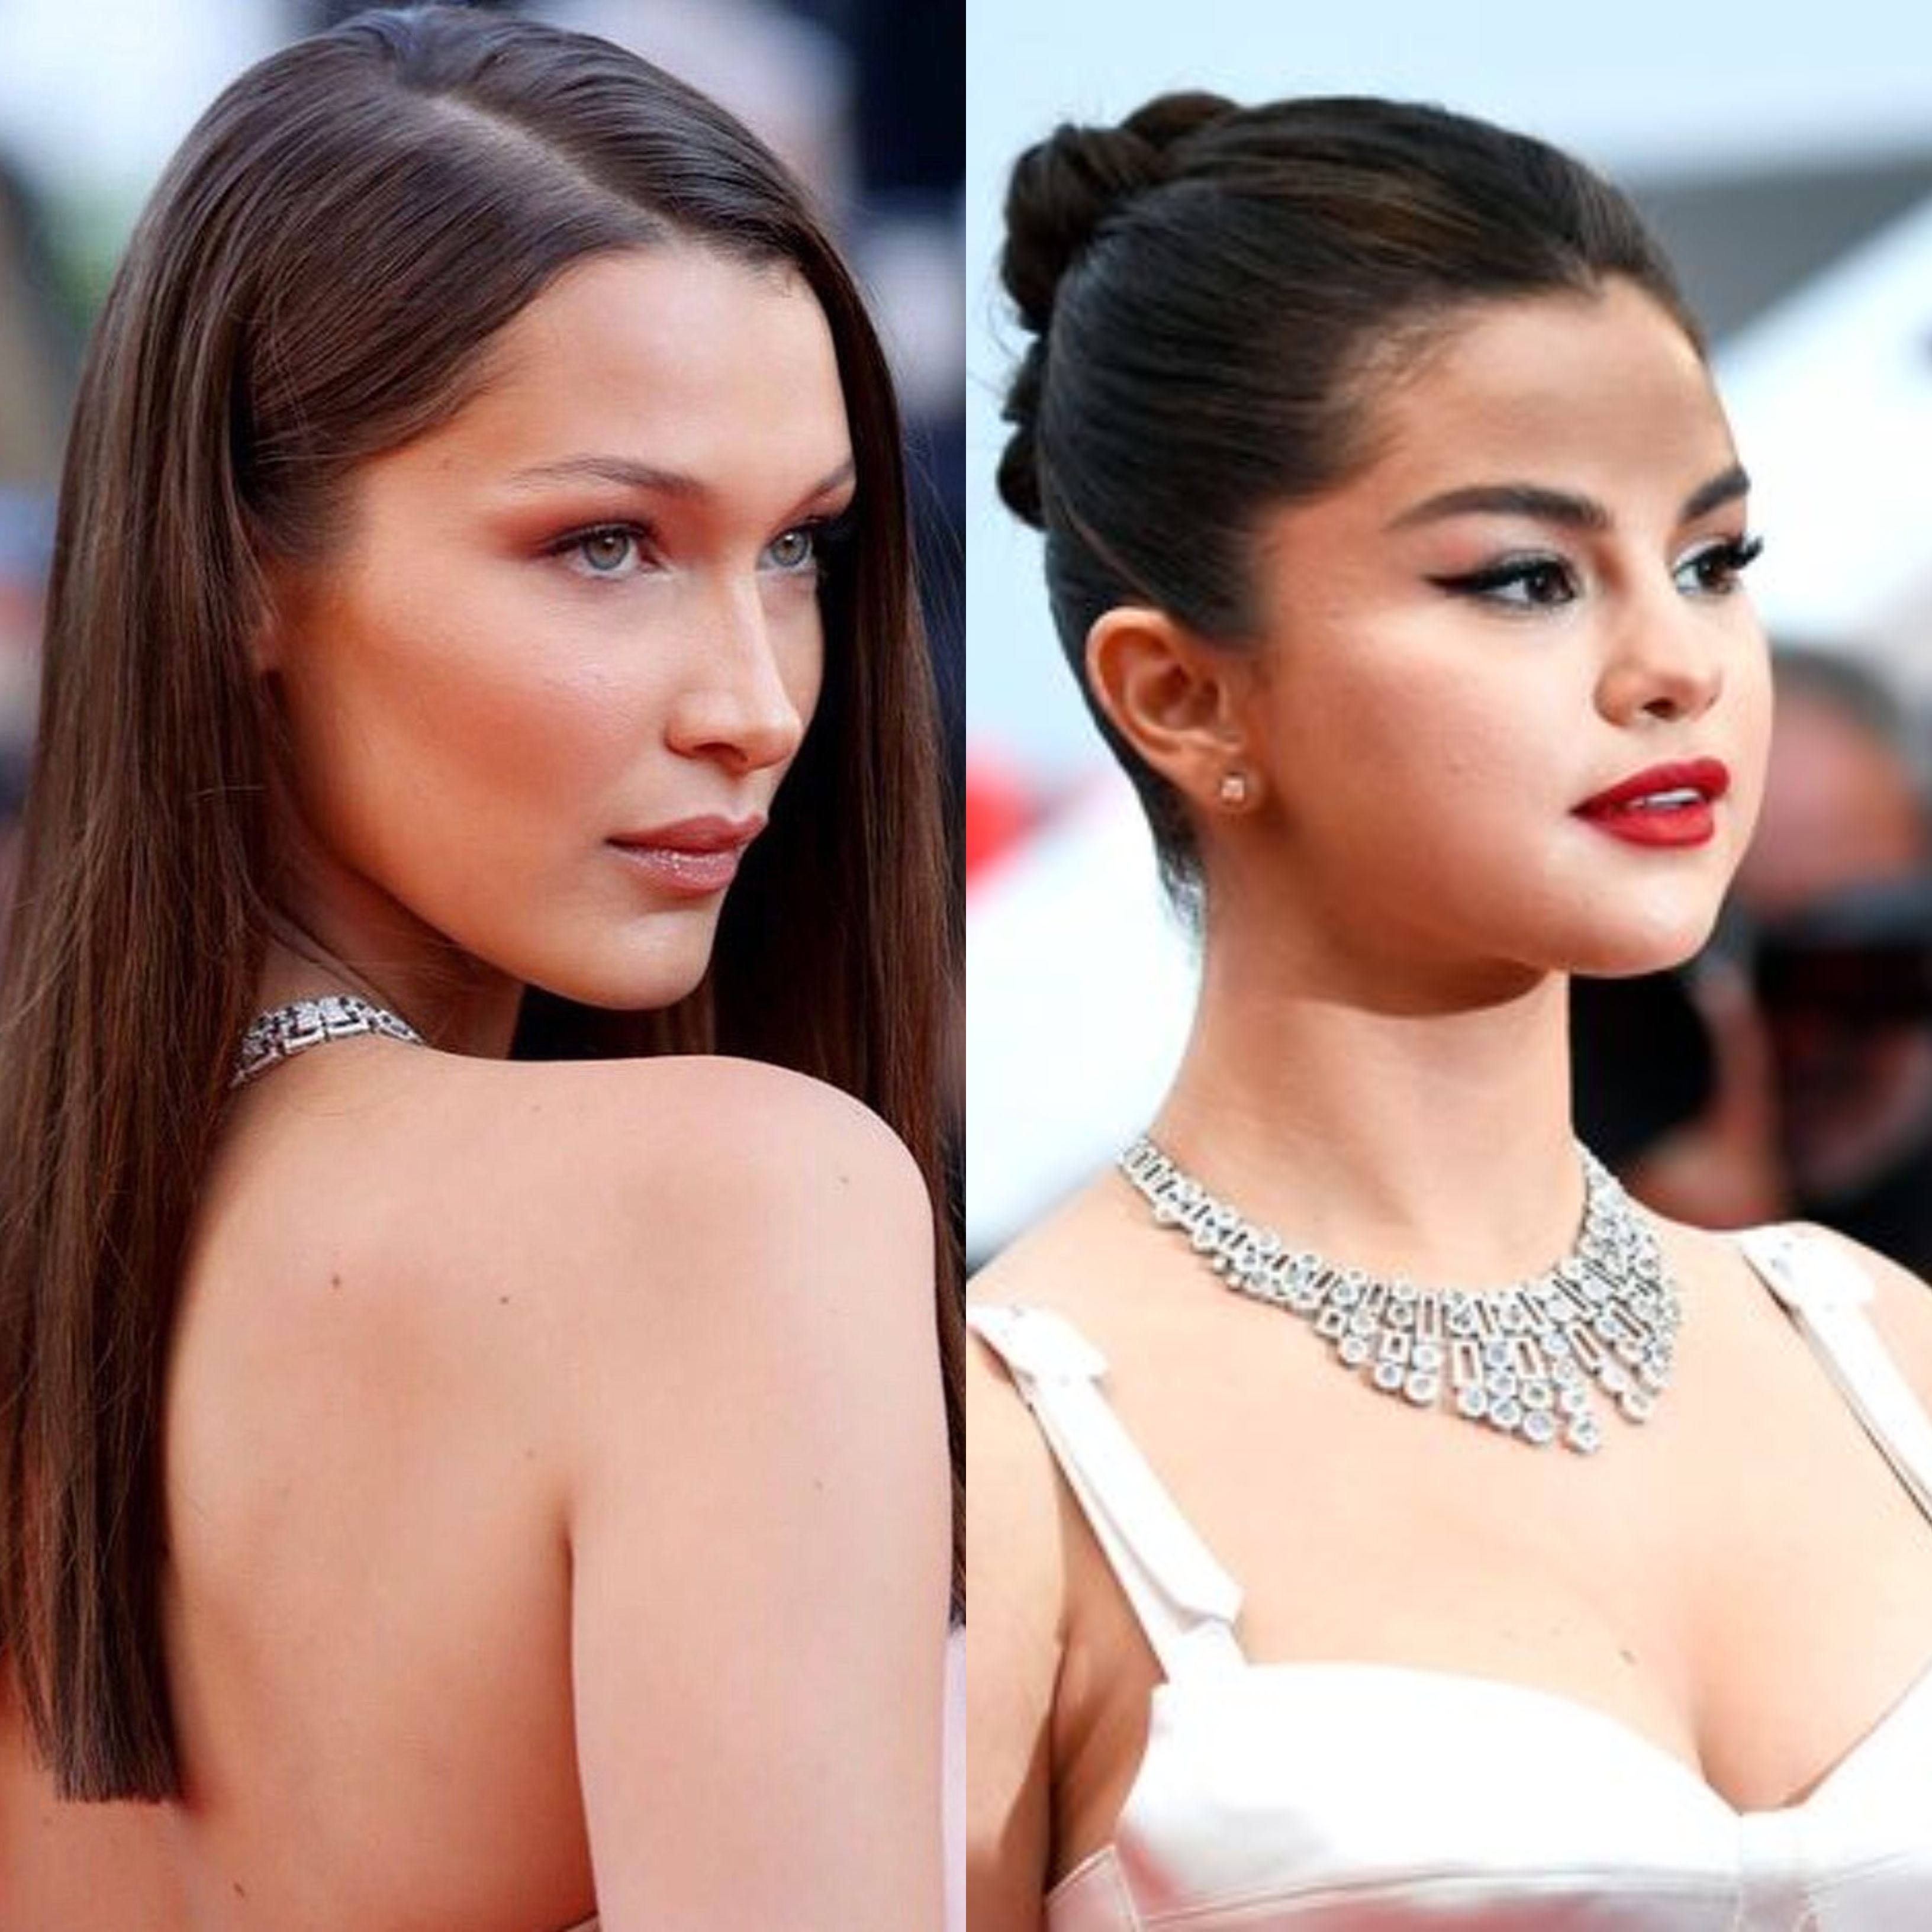 instagram saga shows bella hadid may not be over her beef with selena gomez